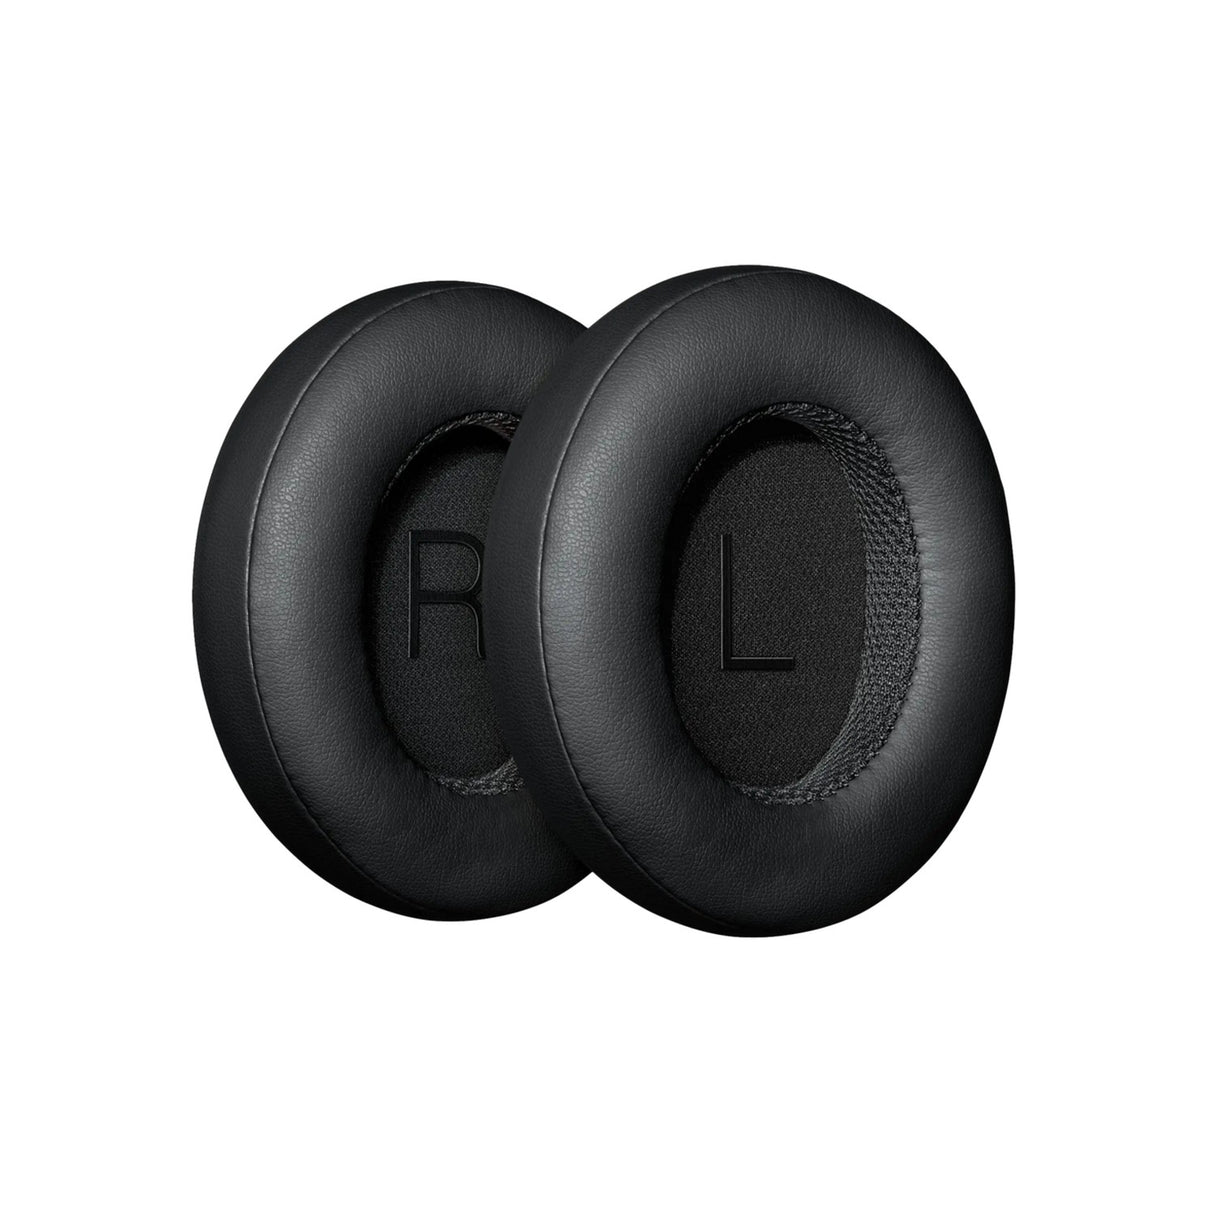 Shure Replacement Ear Pads for AONIC 50 Gen 2, Black